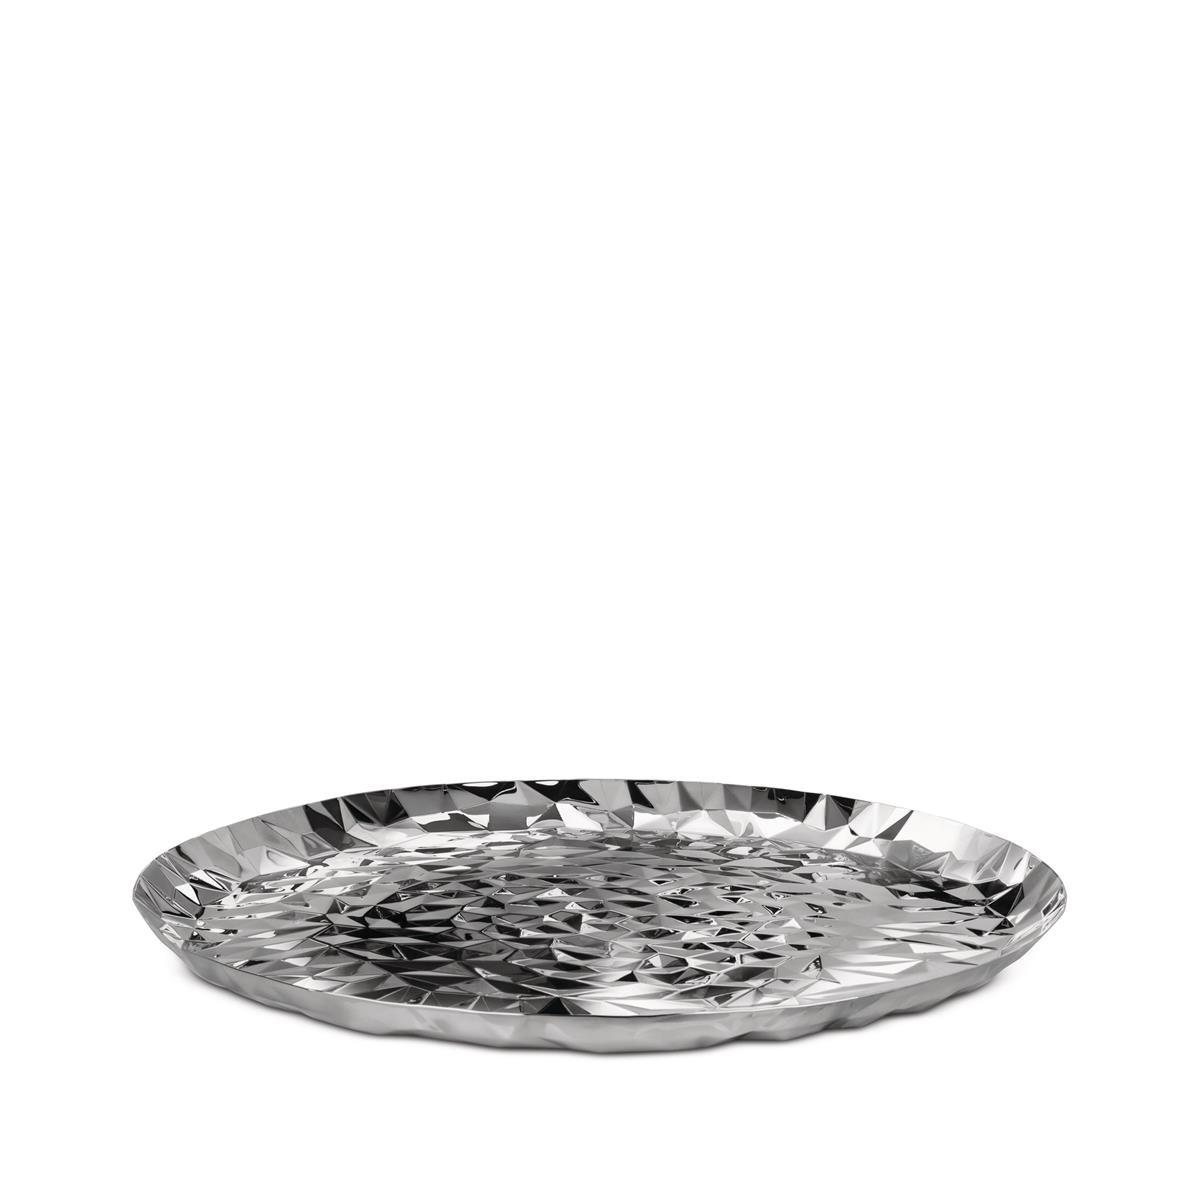 Alessi-Joy n 3 Round tray in 18/10 stainless steel mirror polished